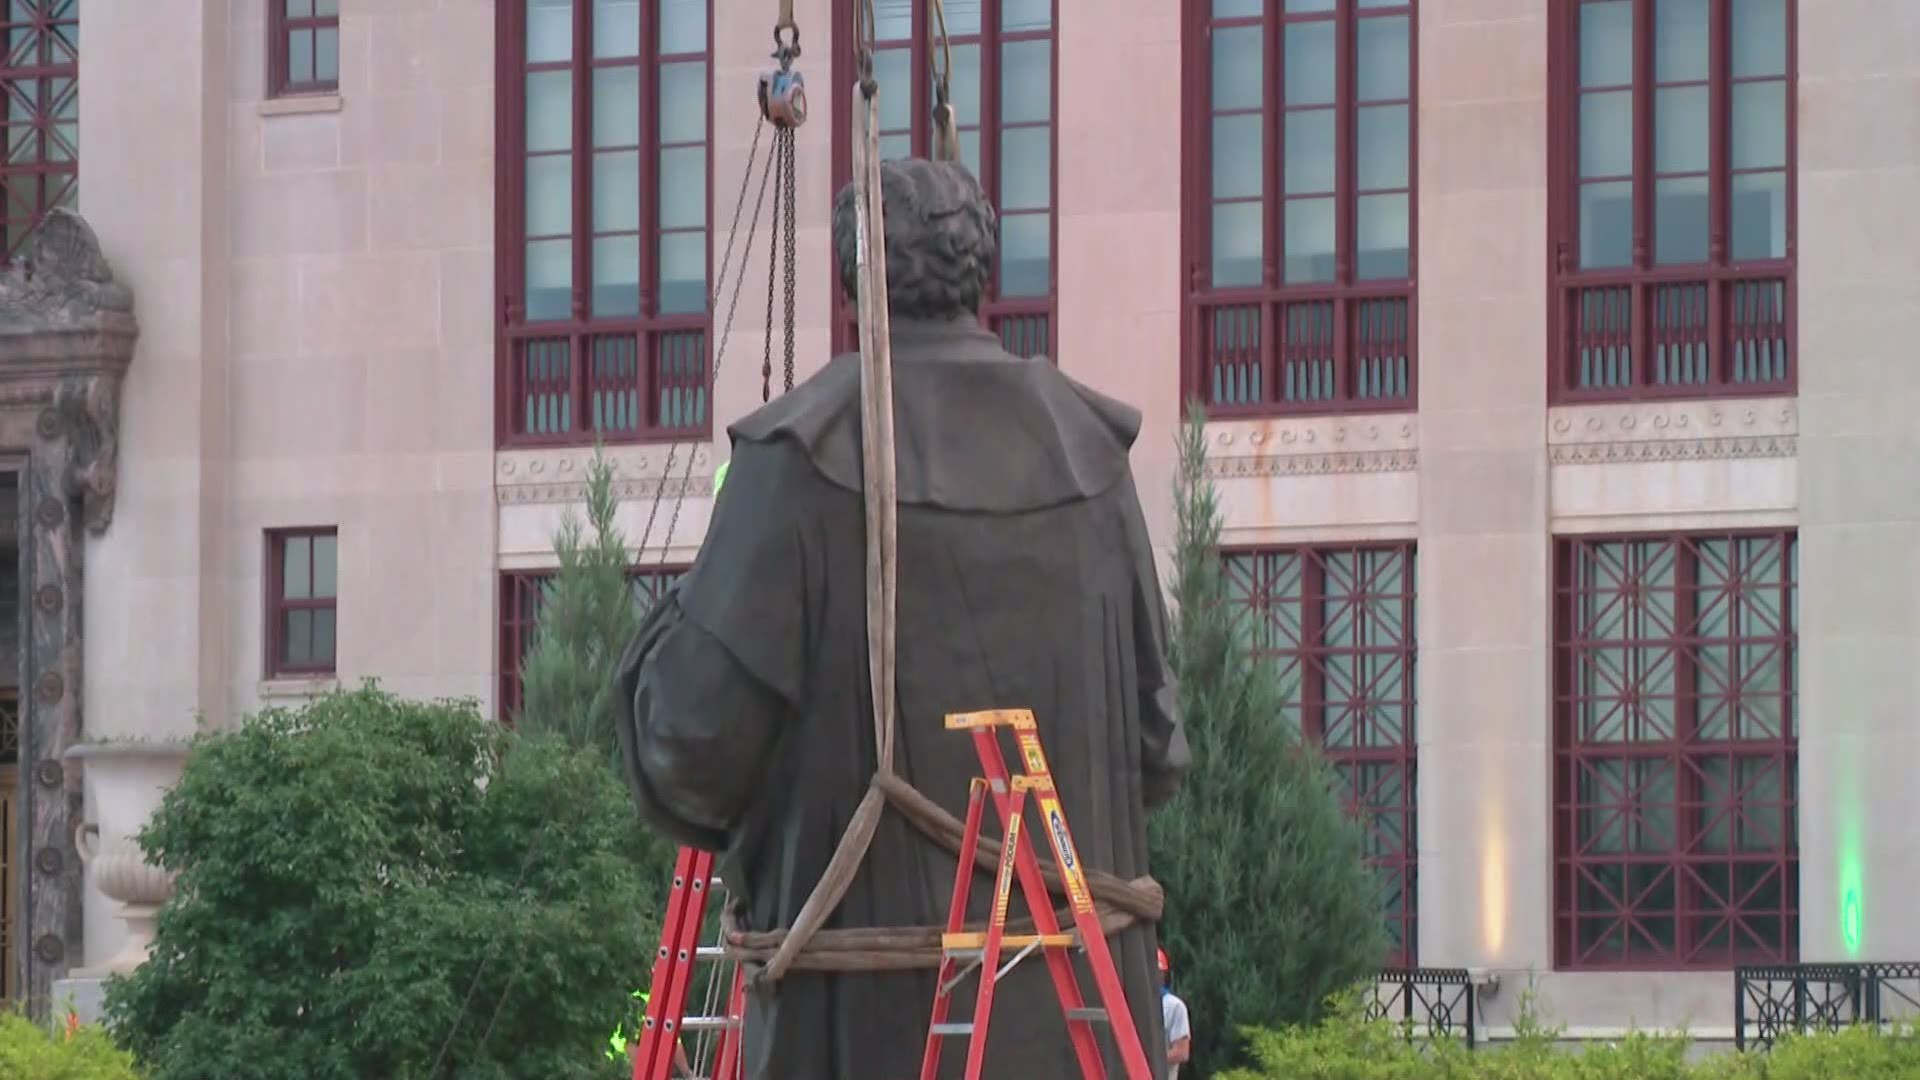 Crews removed the Christopher Columbus statue outside Columbus city hall Wednesday morning.